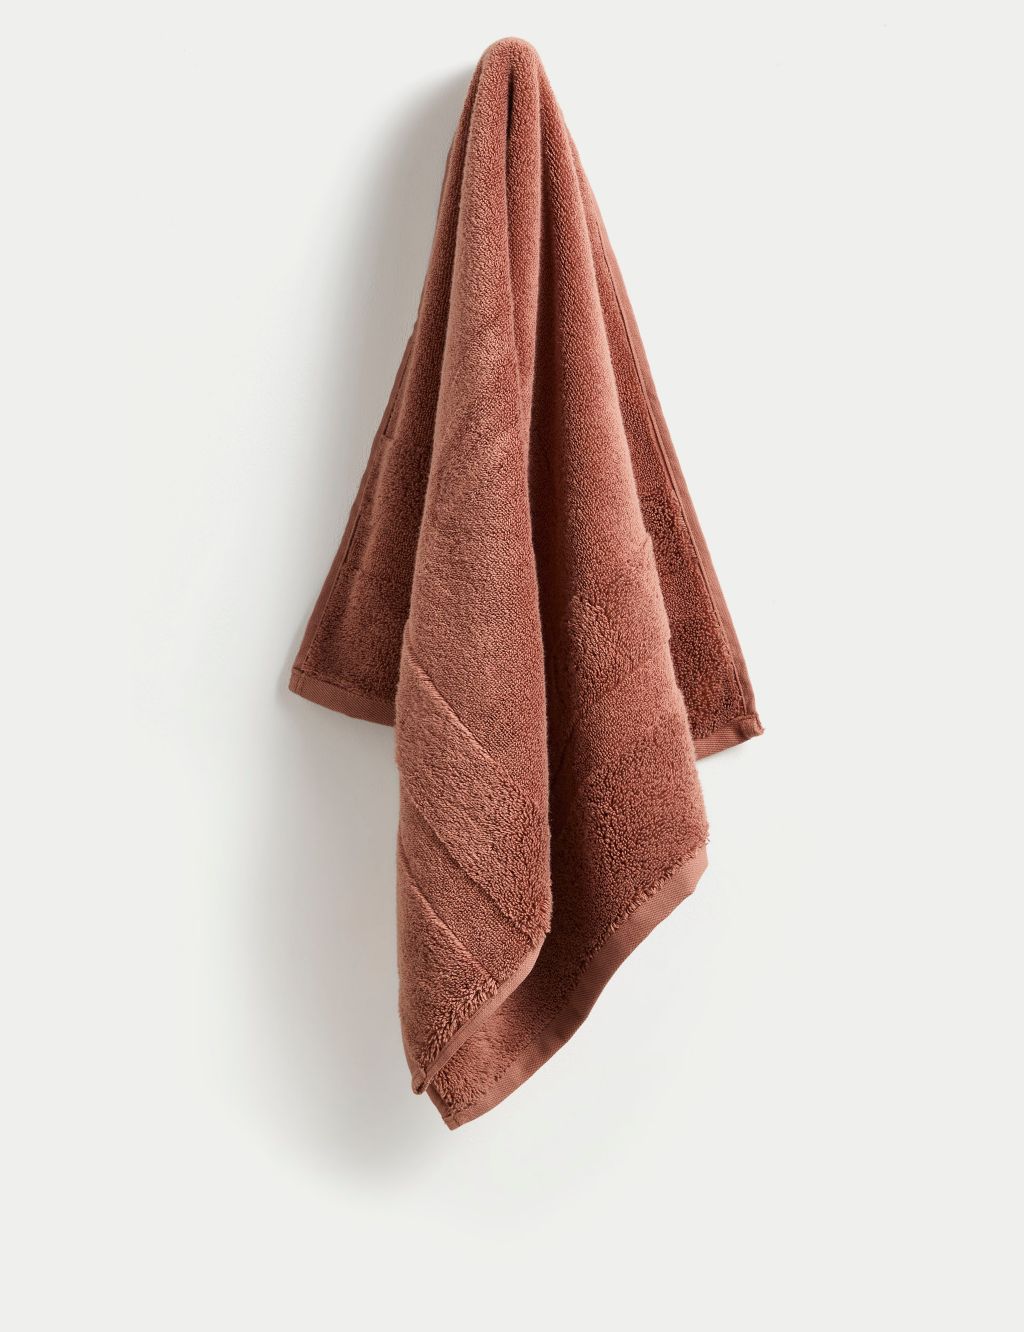 Ultimate Turkish Cotton Towel 2 of 5